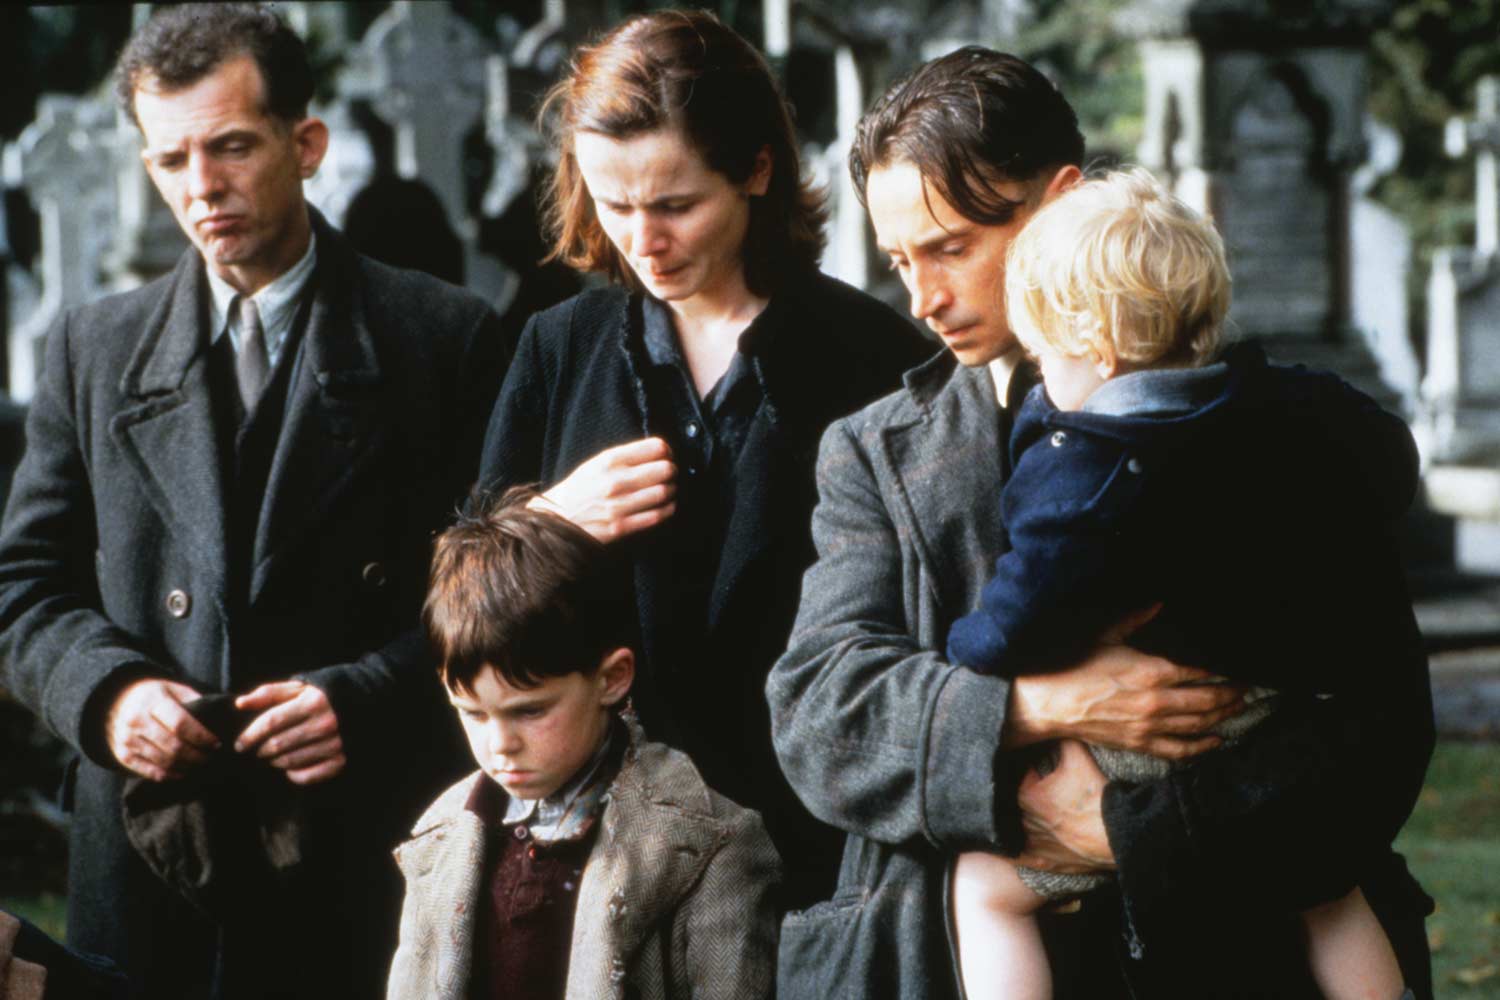 Emily Watson and Robert Carlyle in scene from Angela's Ashes